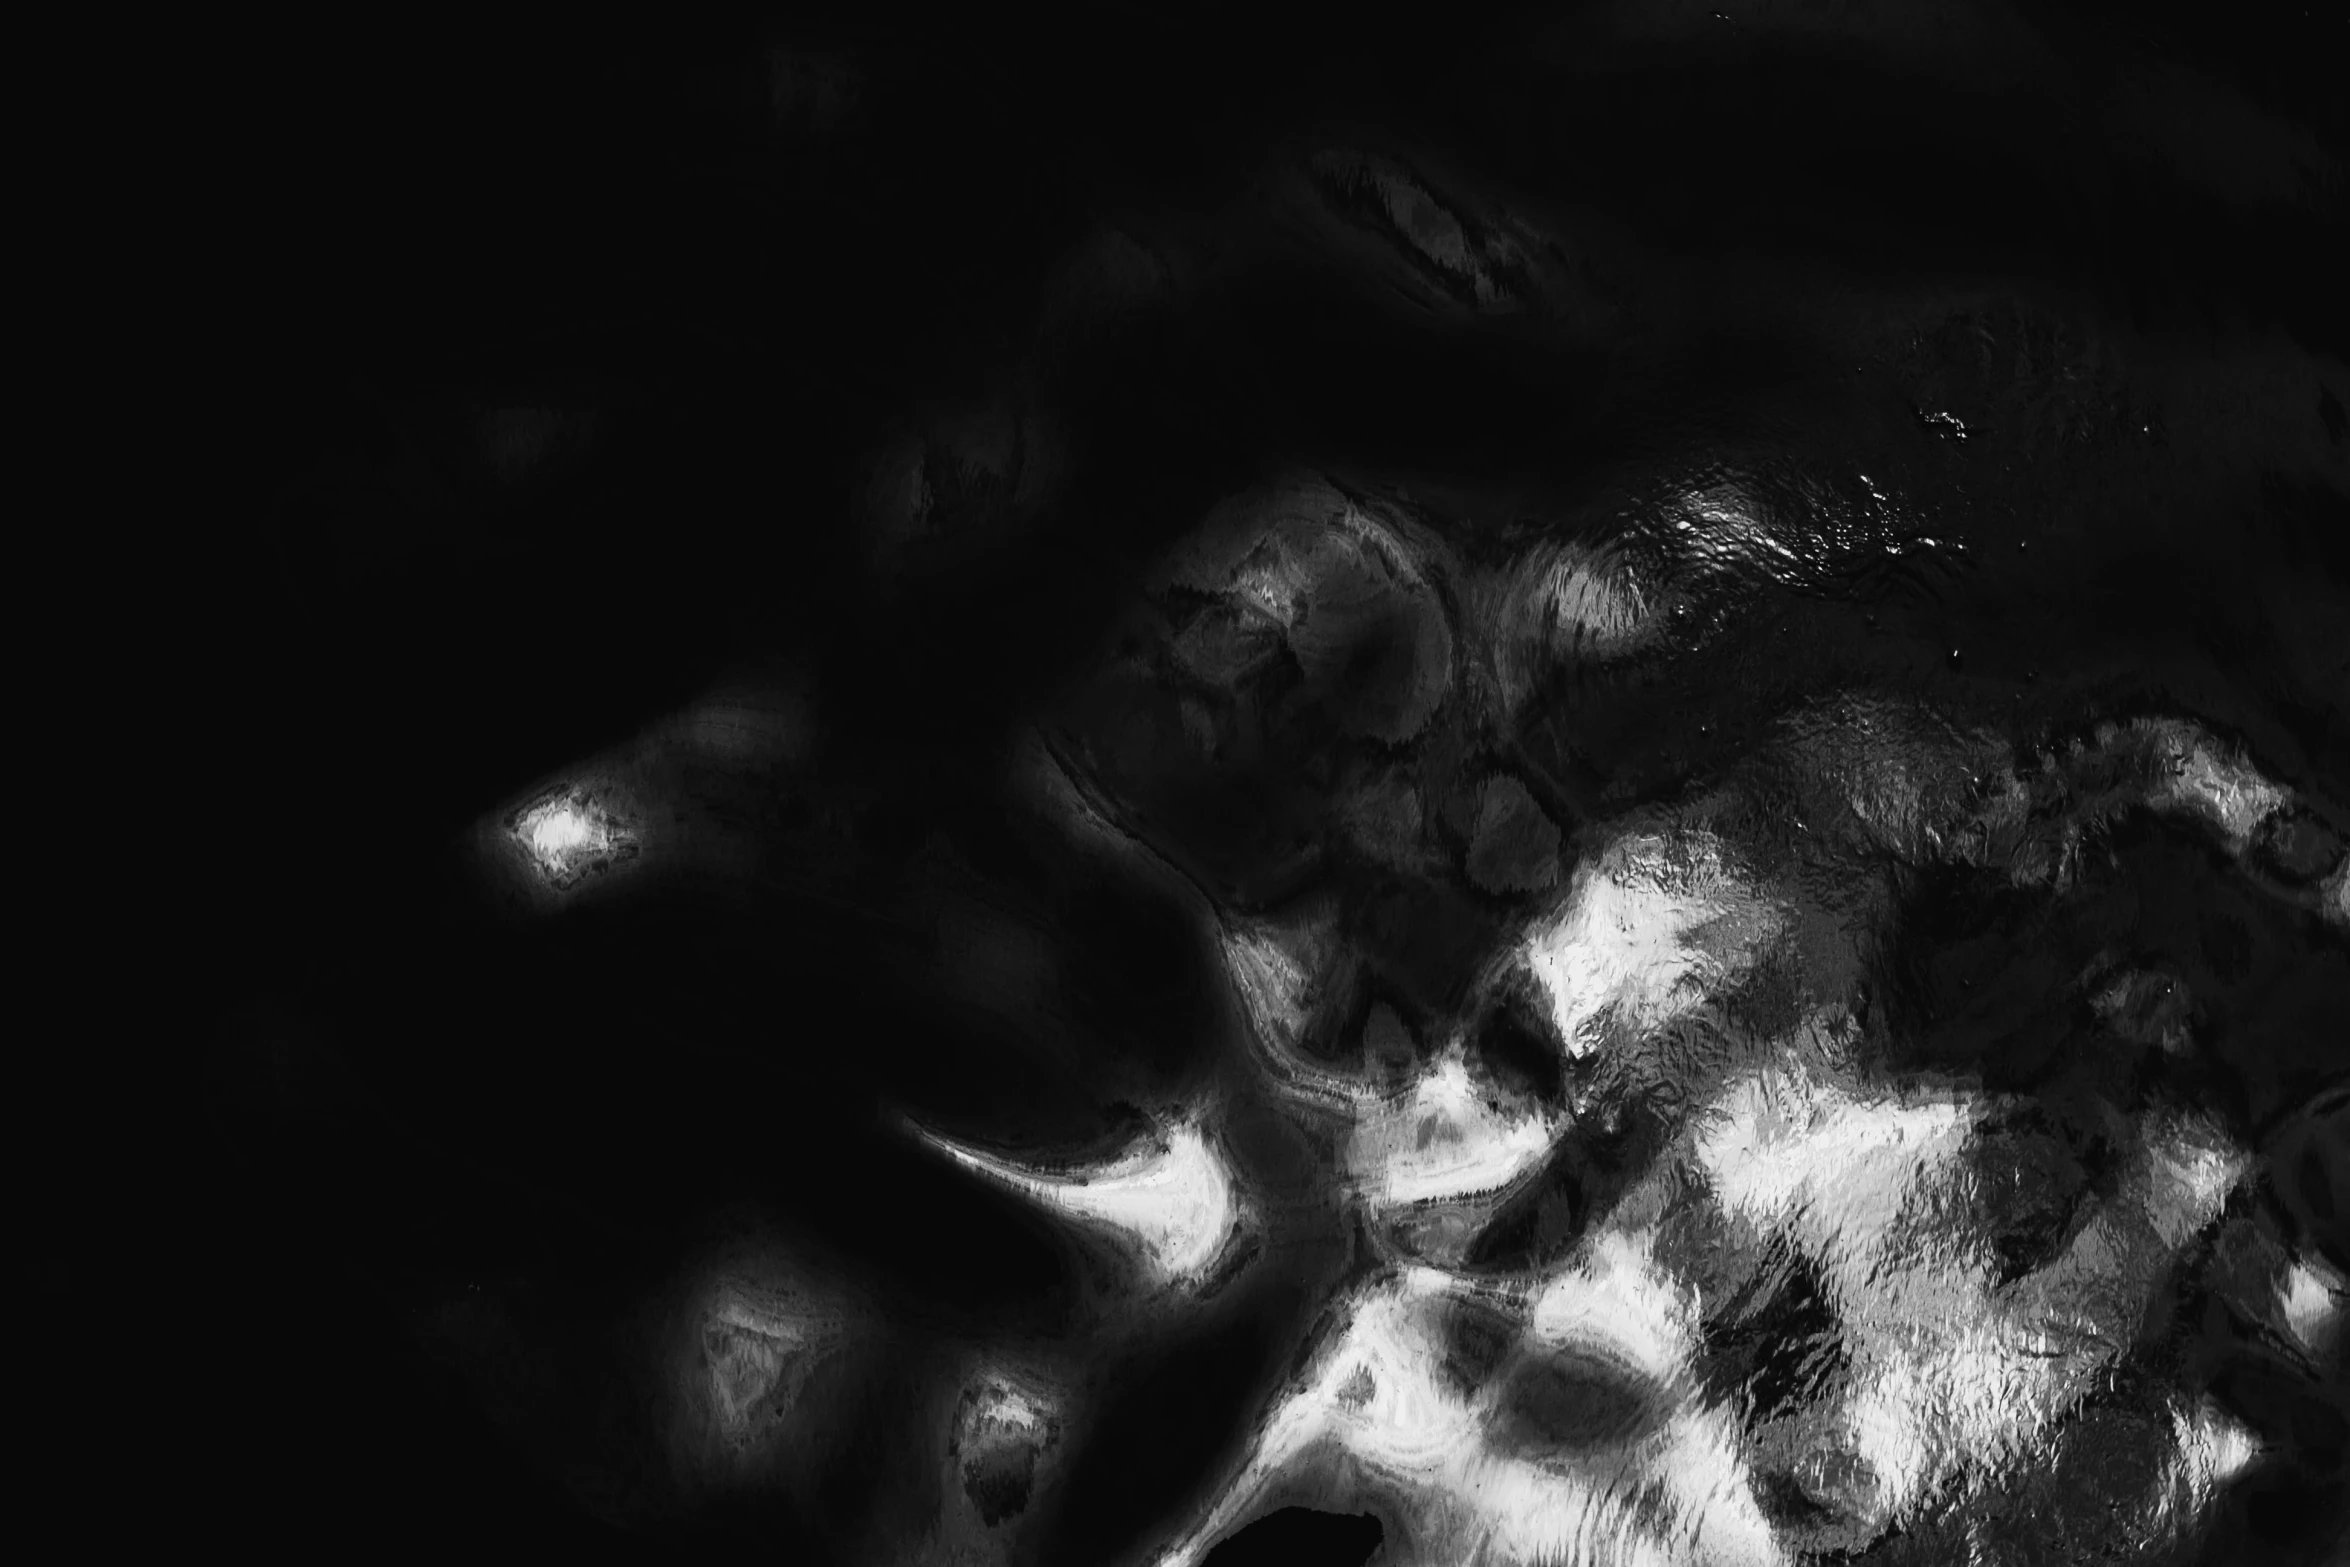 a black and white photo of a giraffe, an album cover, inspired by Anna Füssli, reddit, conceptual art, swirly liquid fluid abstract art, background image, abstract black leather, night